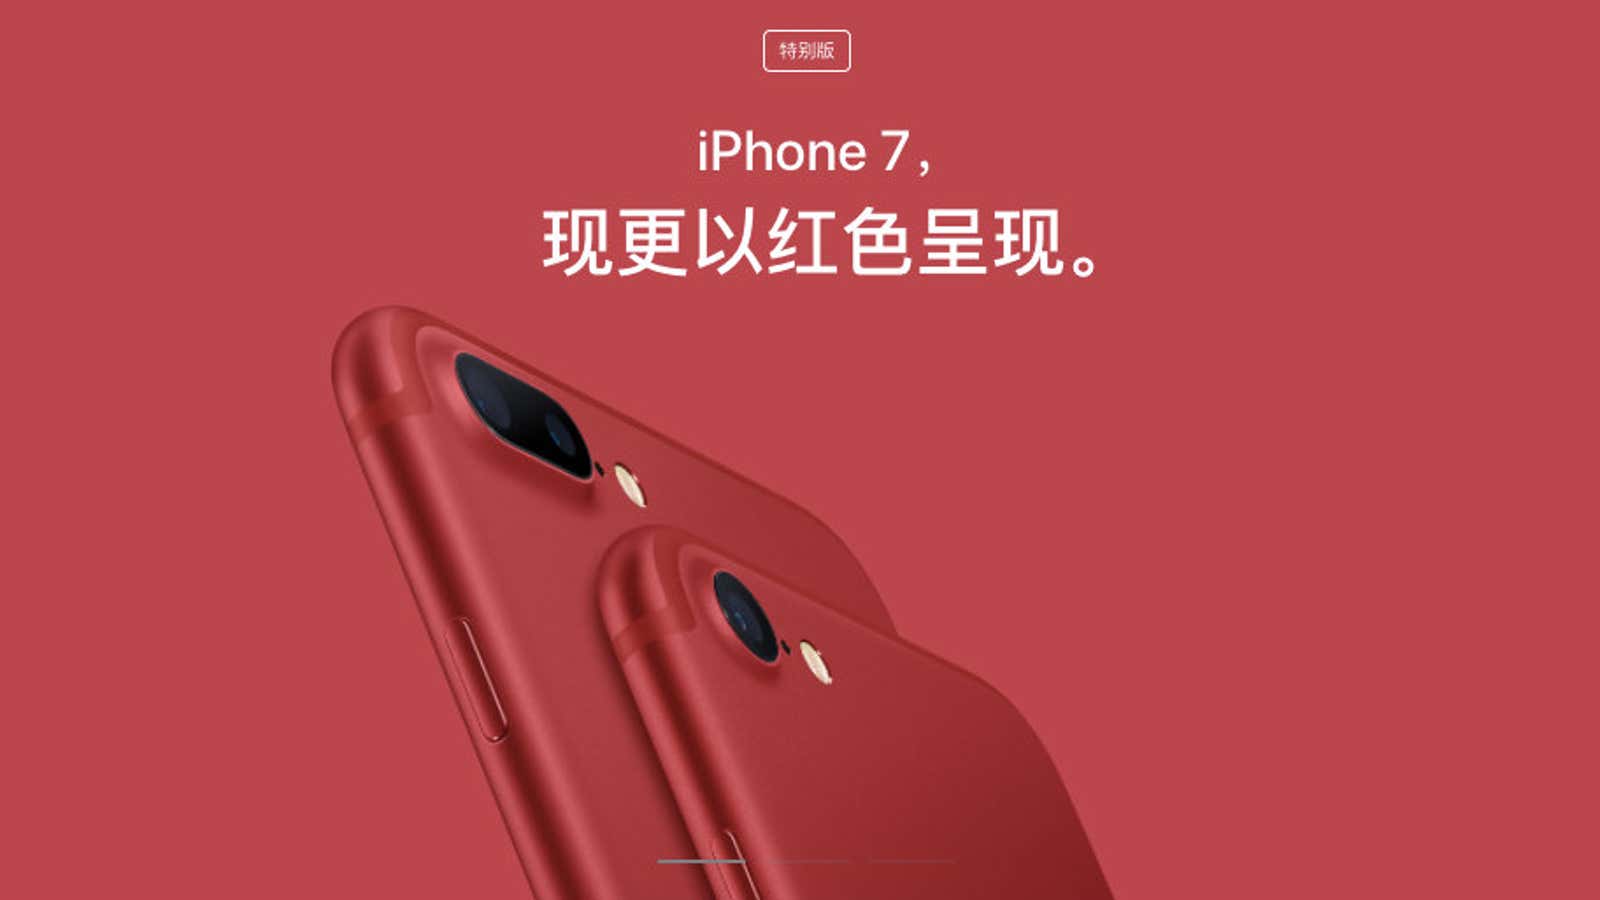 Just a regular iPhone, but red.